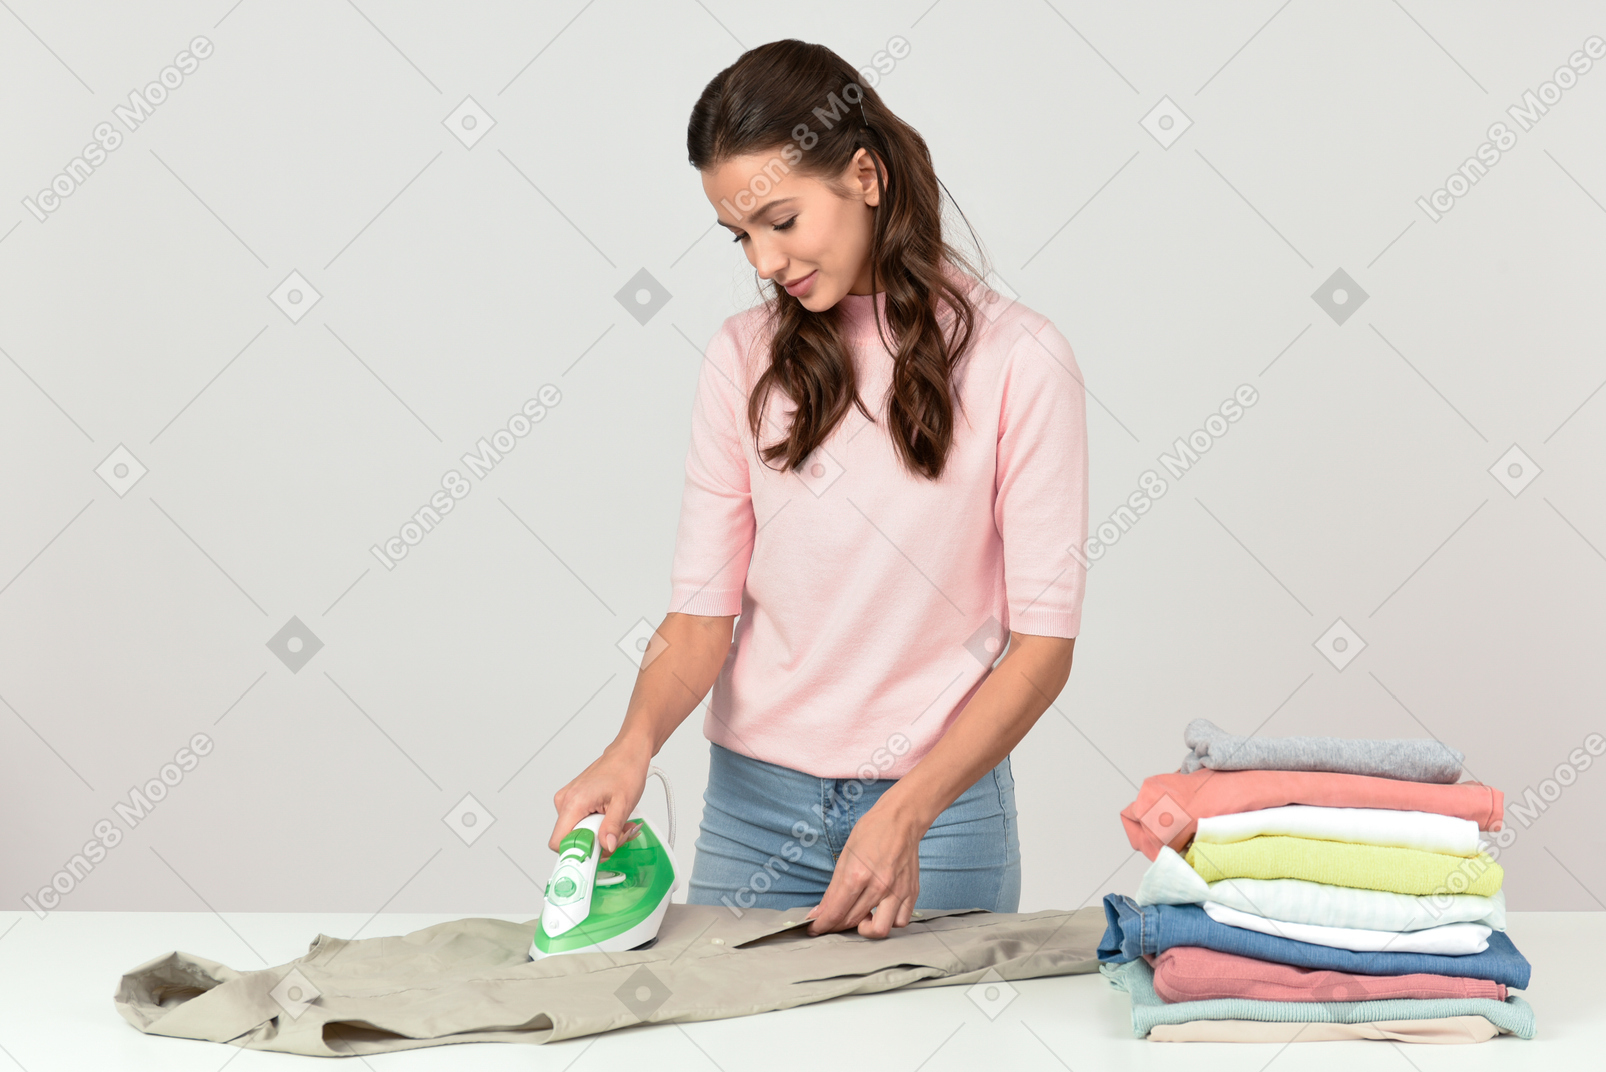 Neat and clean ironing with no wrinkles on clothes